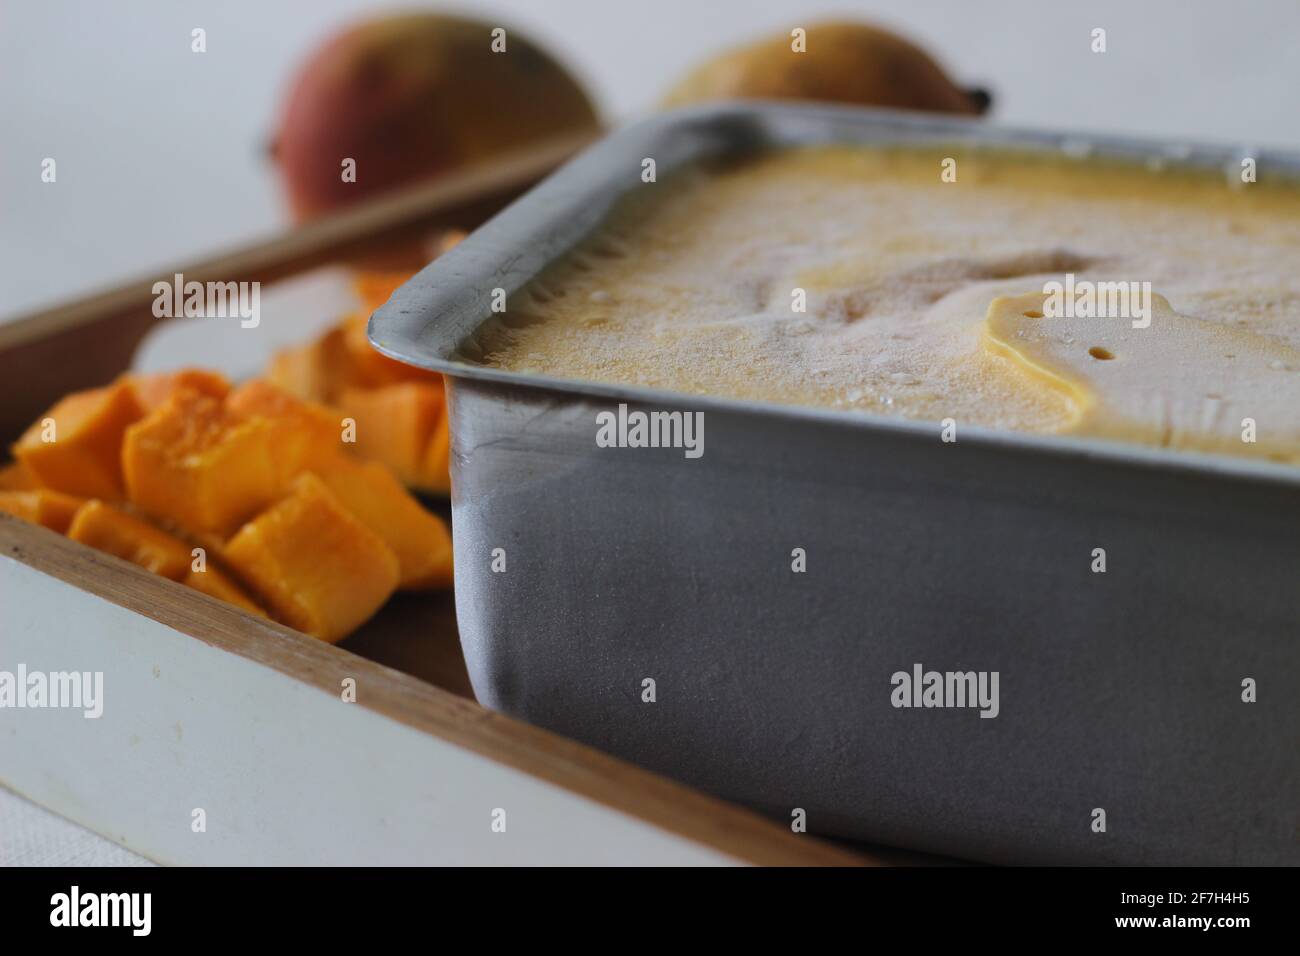 https://c8.alamy.com/comp/2F7H4H5/home-made-mango-ice-cream-prepared-using-lalbagh-mangoes-kept-outside-from-freezer-in-an-aluminium-tray-a-treat-in-the-summer-heat-2F7H4H5.jpg